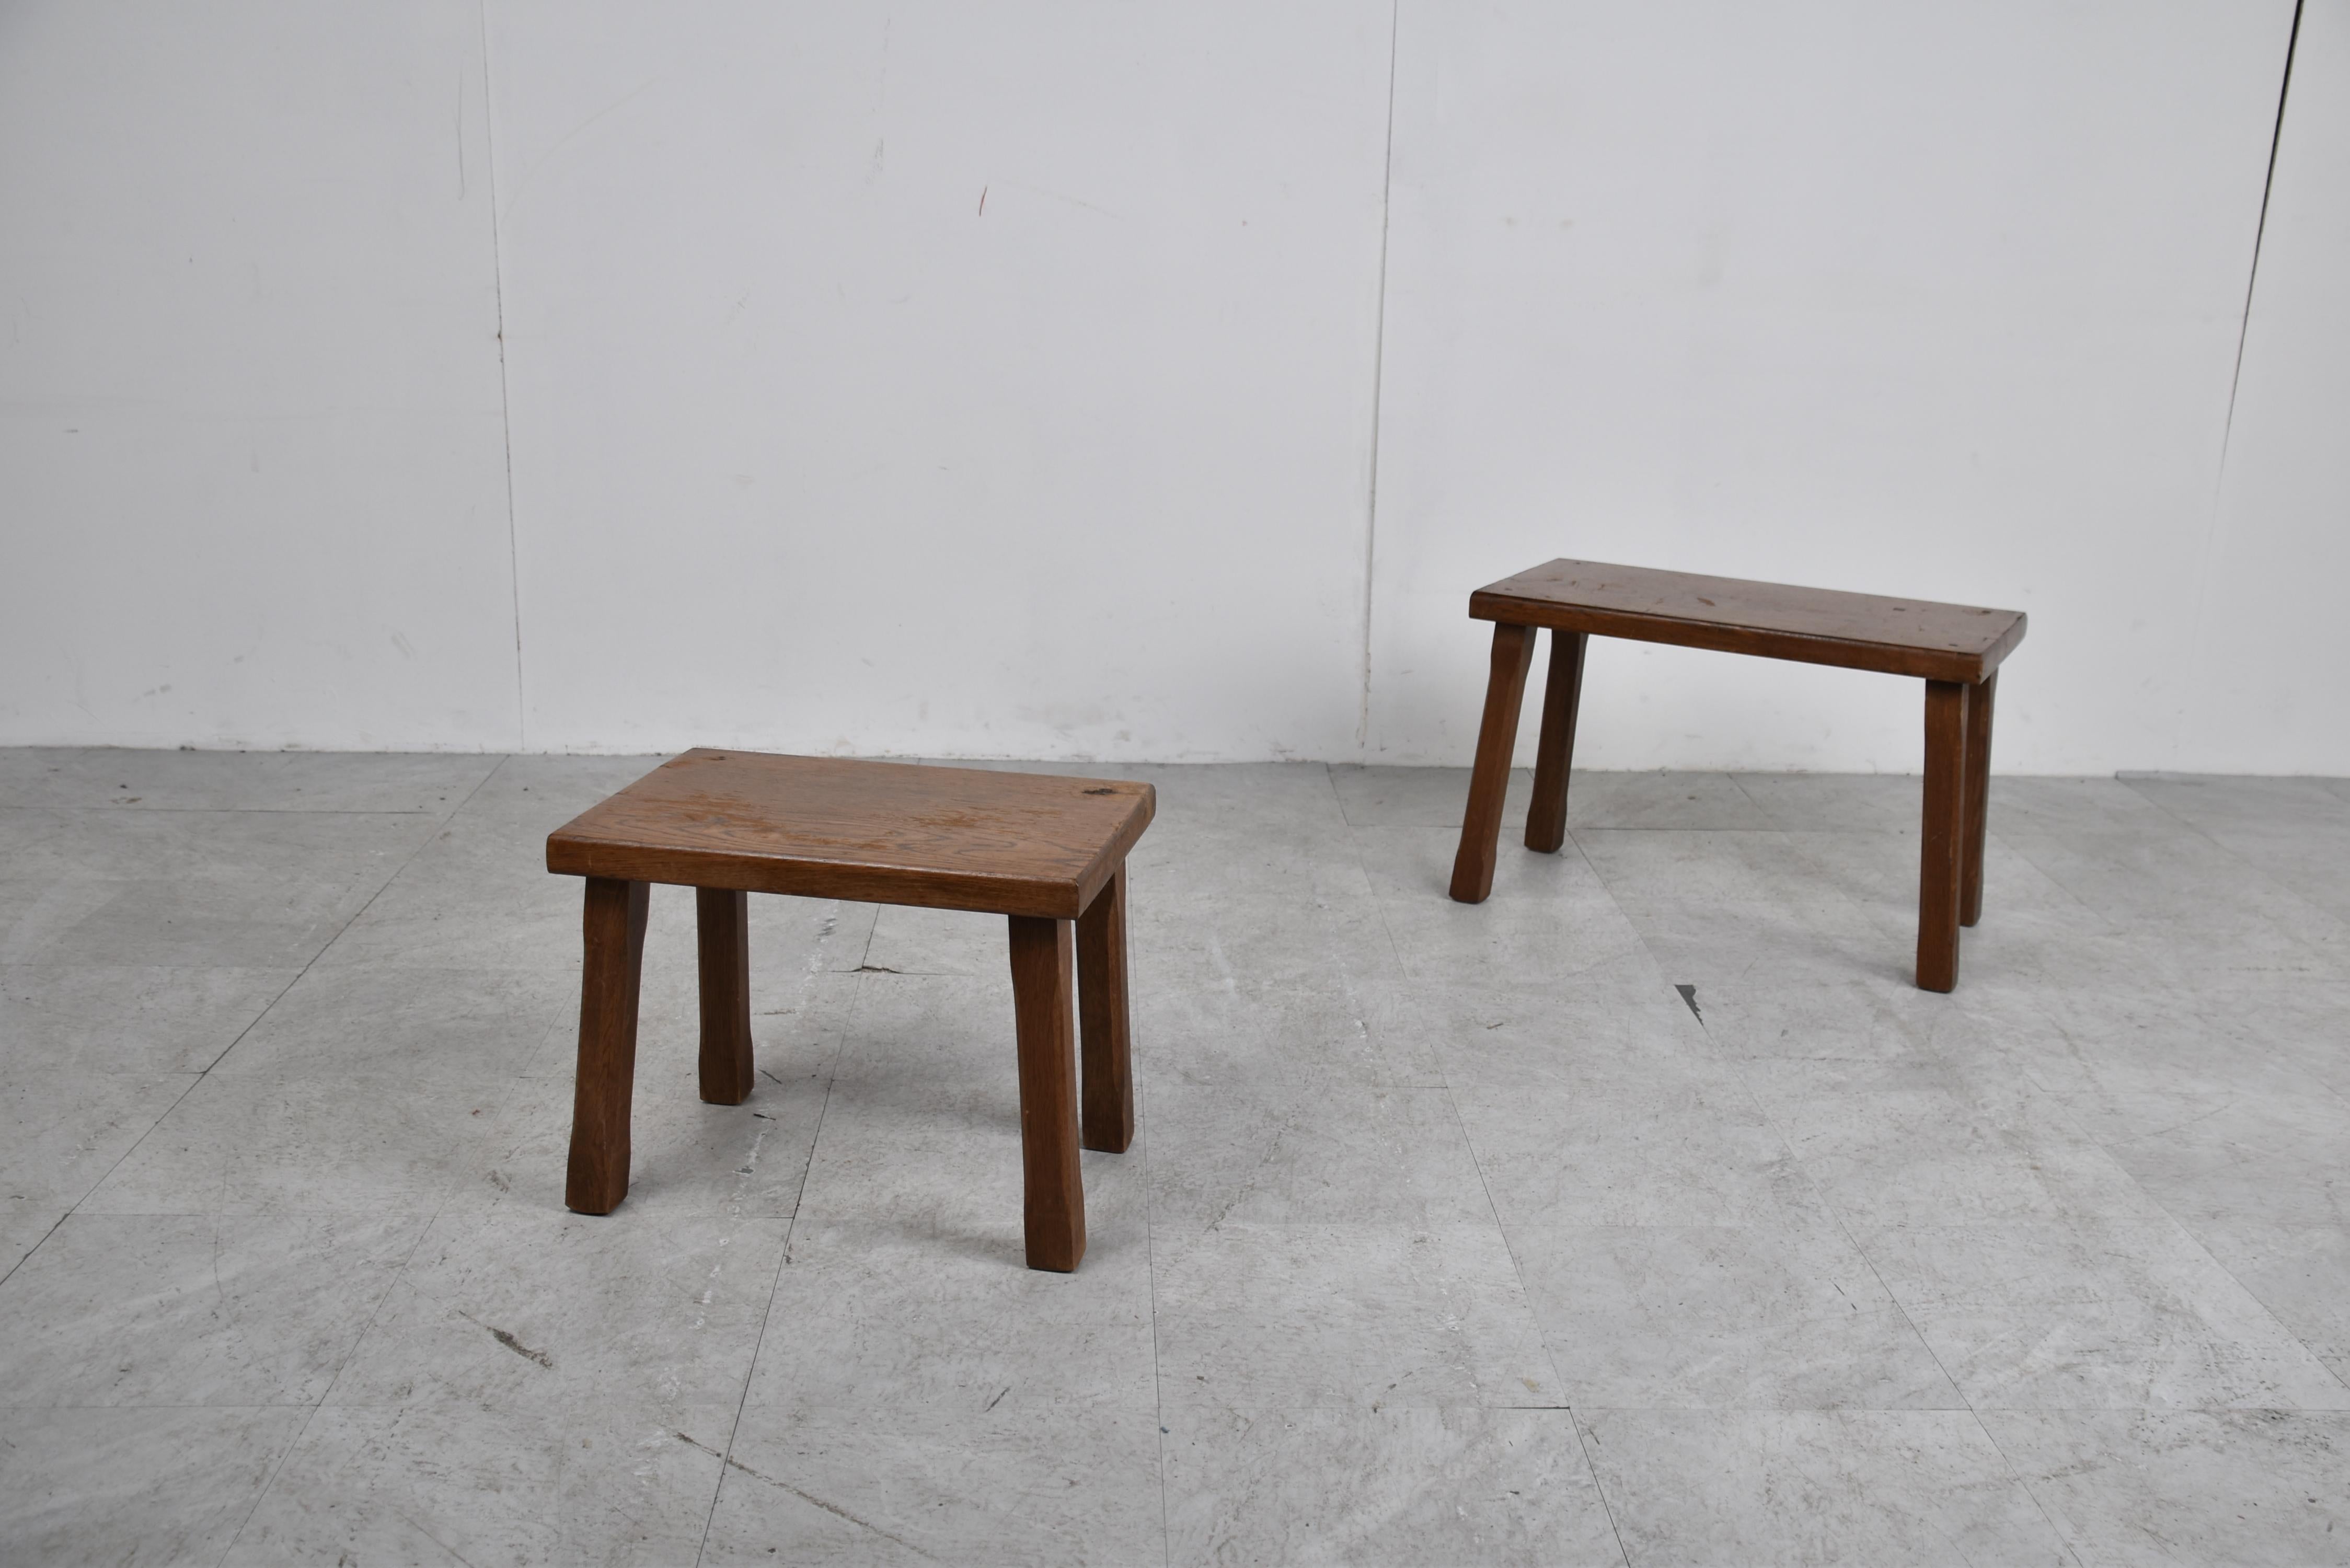 Lovely set of brutalist oak nesting tables.

Primitive and robuste design.

1960s - Belgium

Good condition

Dimensions of the largest table:

Height: 40cm/15.74